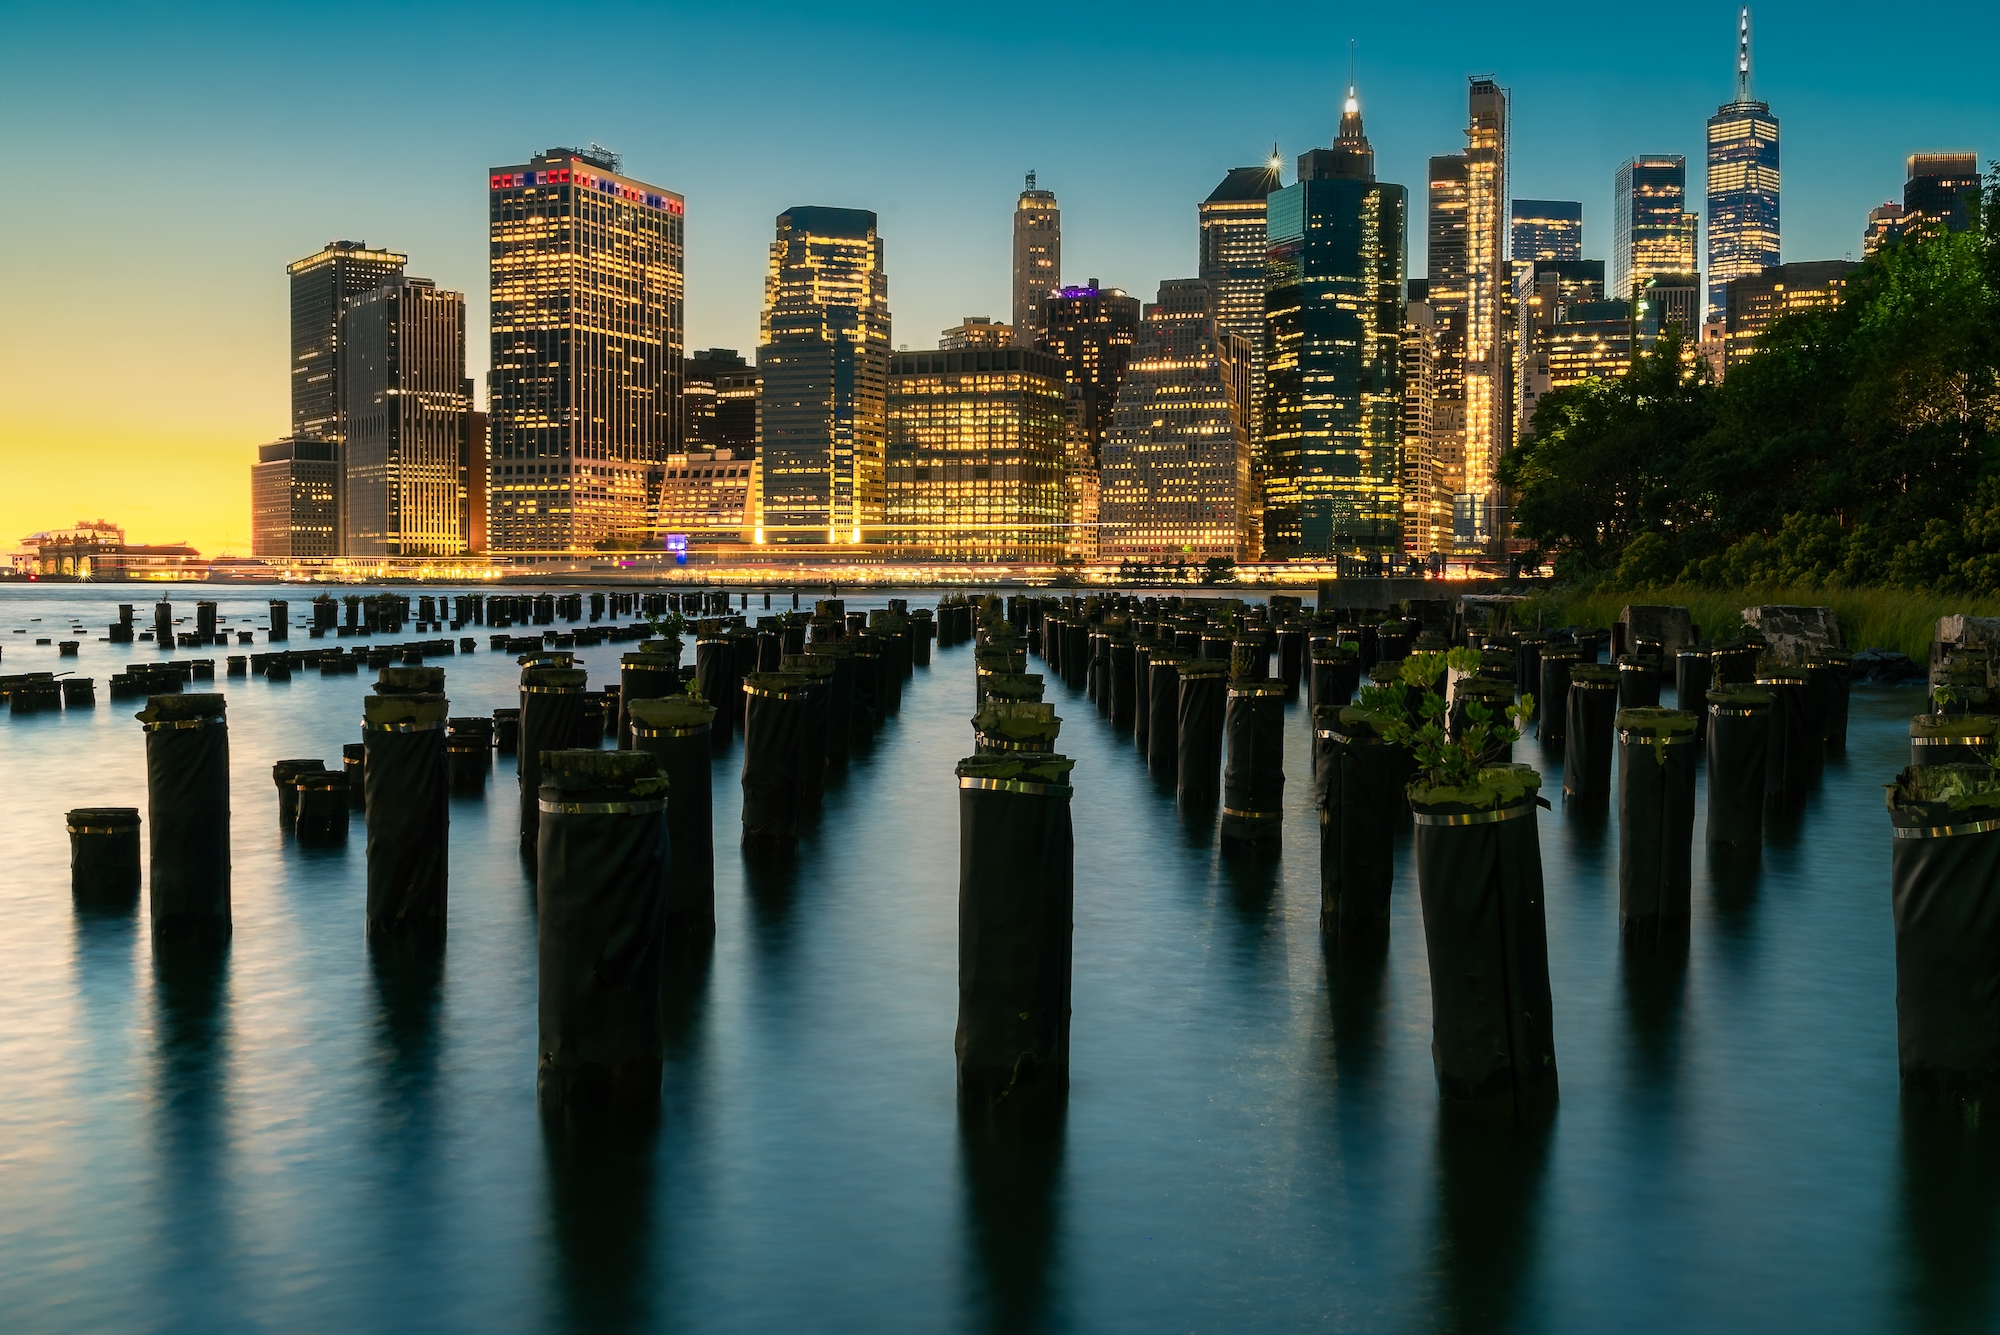 A photo of New York's skyline is shown.